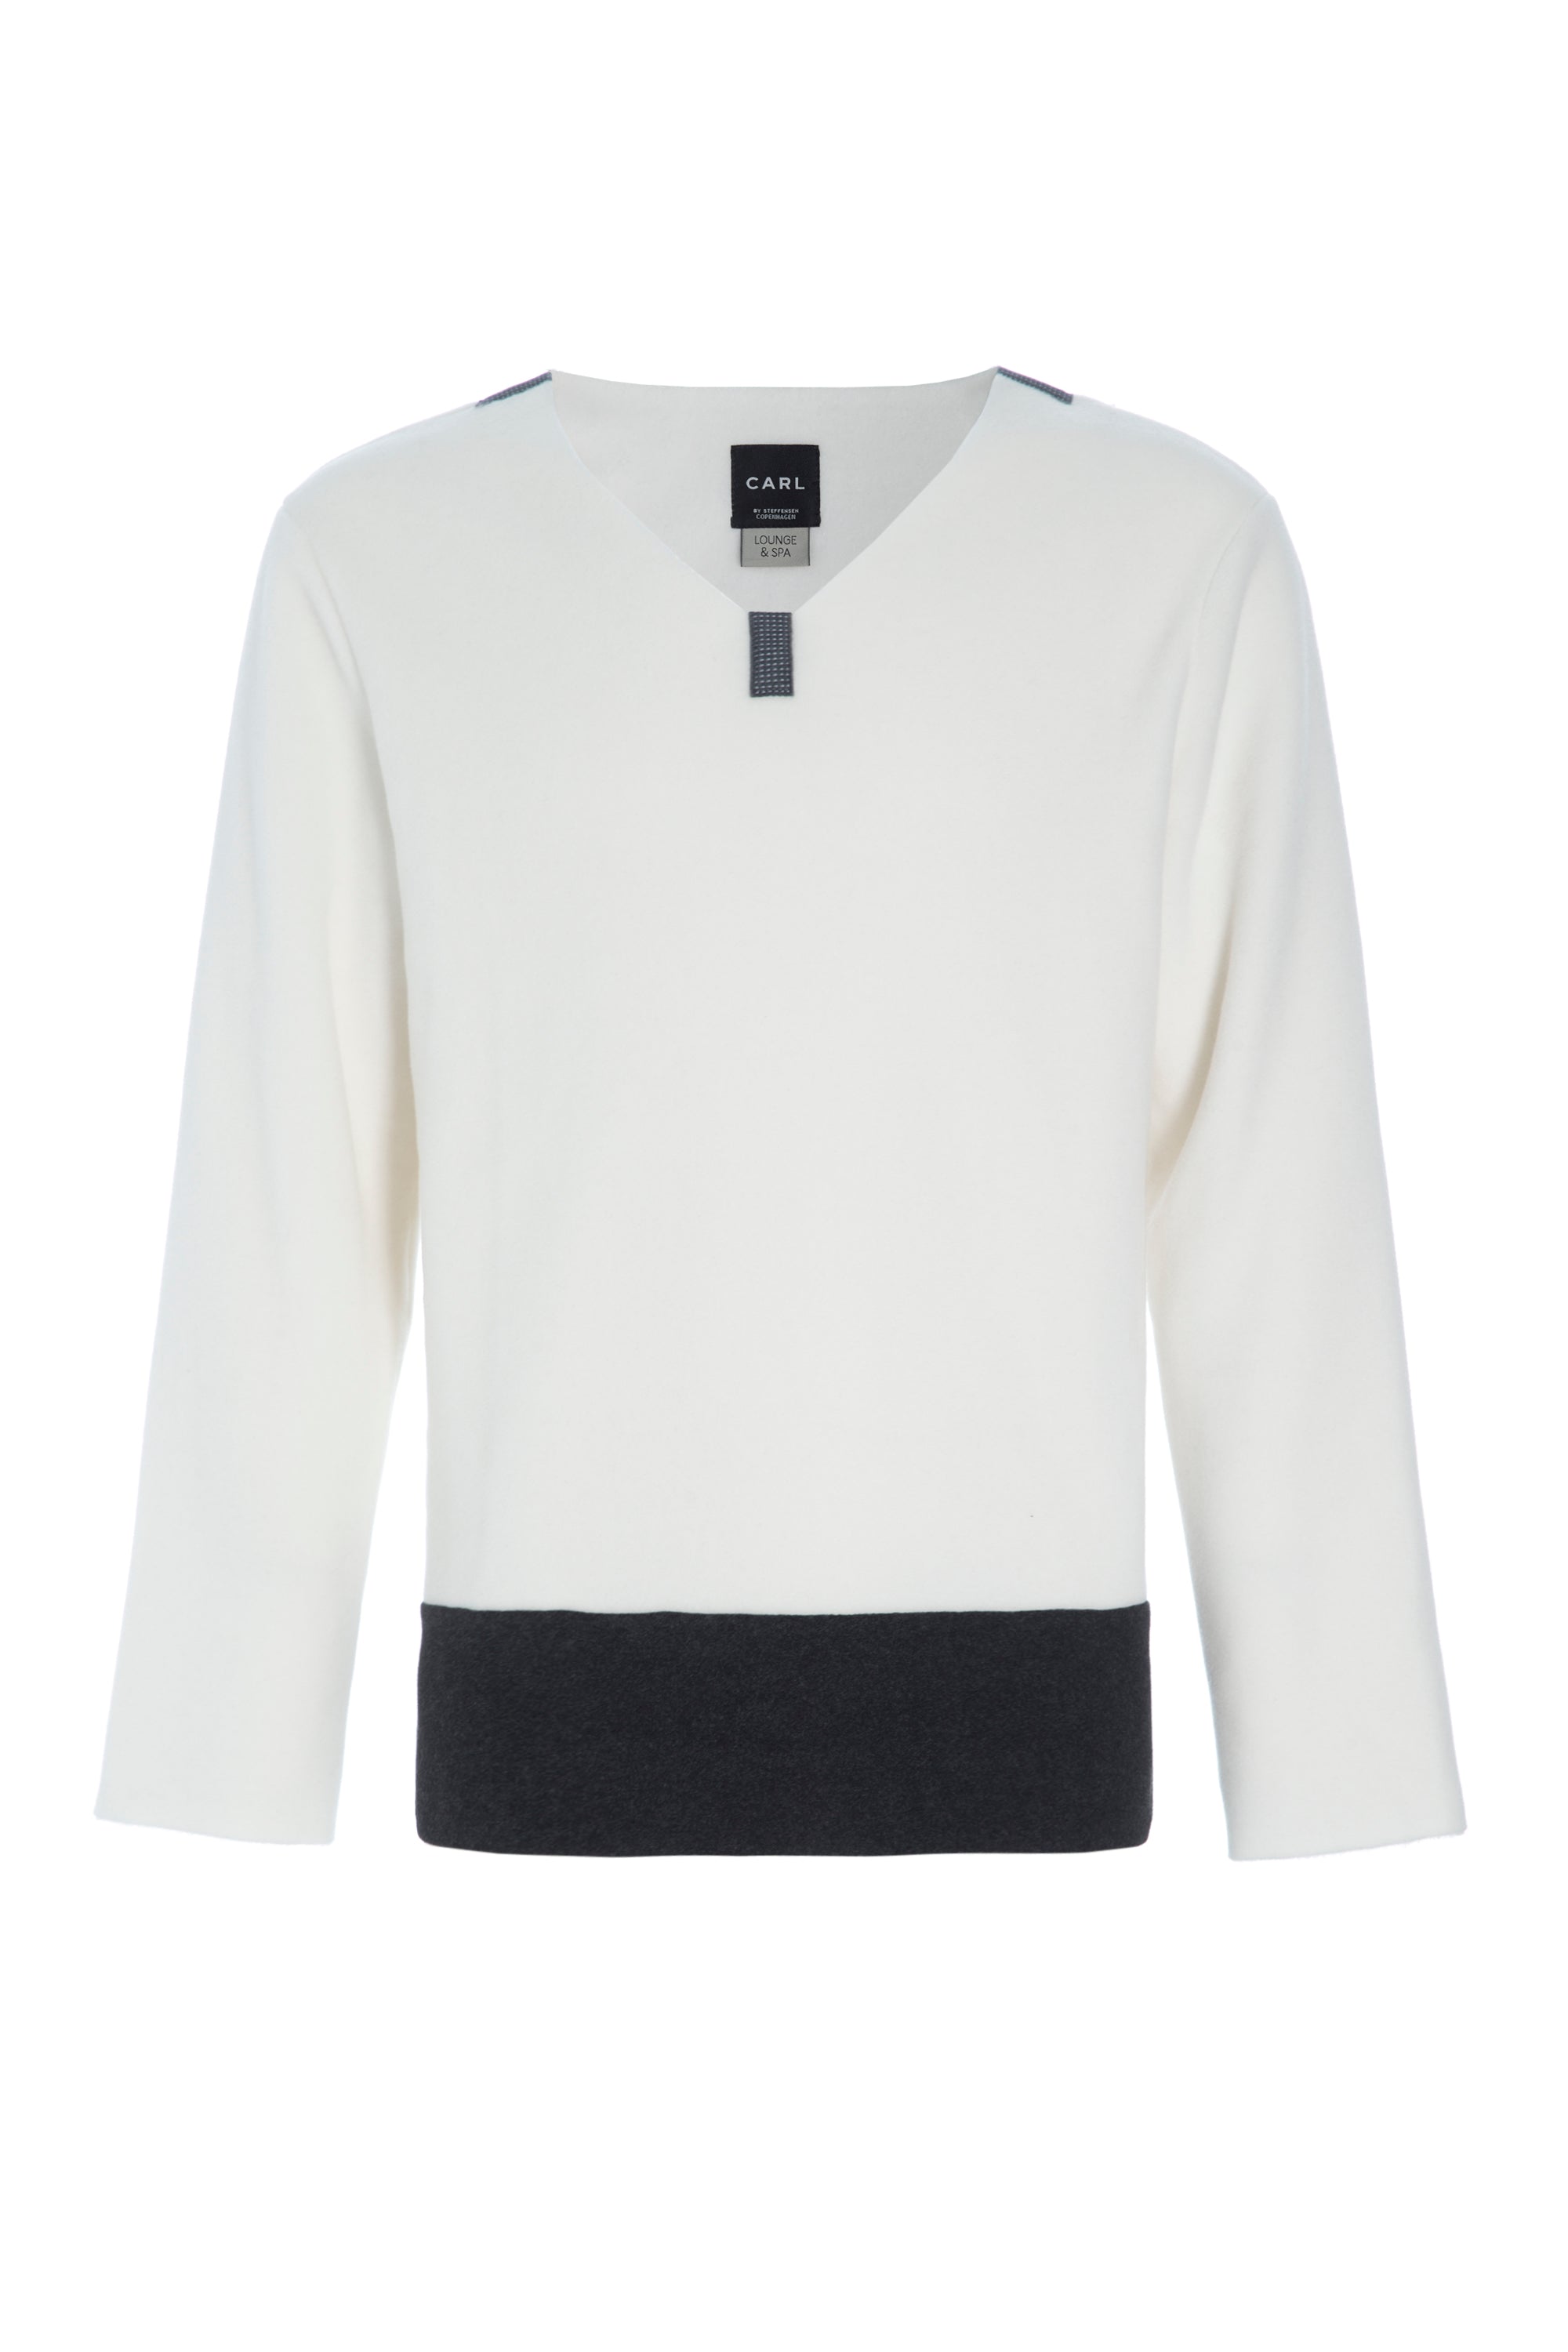 CARL BY STEFFENSEN COPENHAGEN ONE SIZE BLUSE MÆND - 1013C BLOUSES & SWEATERS OFF WHITE/SOFT BLACK 454